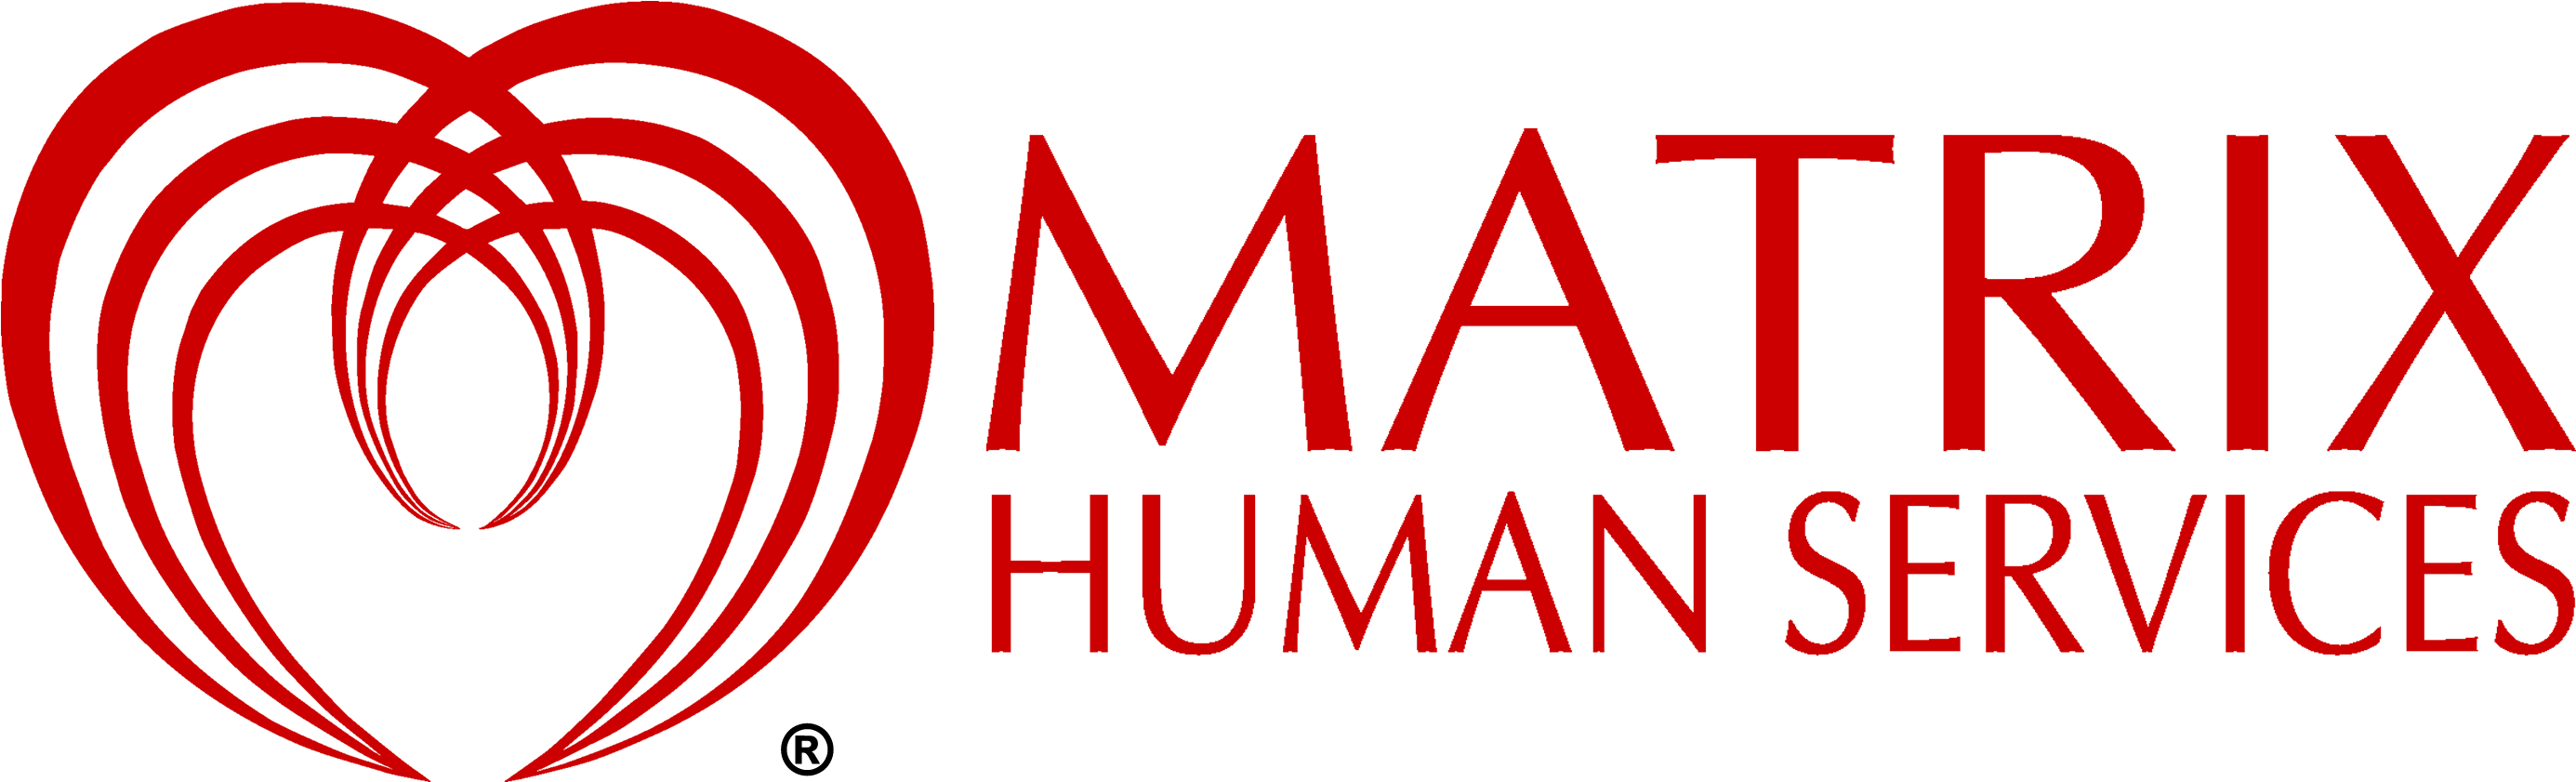 The 22nd Annual Charity Art Auction Fundraising Gala - Matrix Human Services (2800x900), Png Download